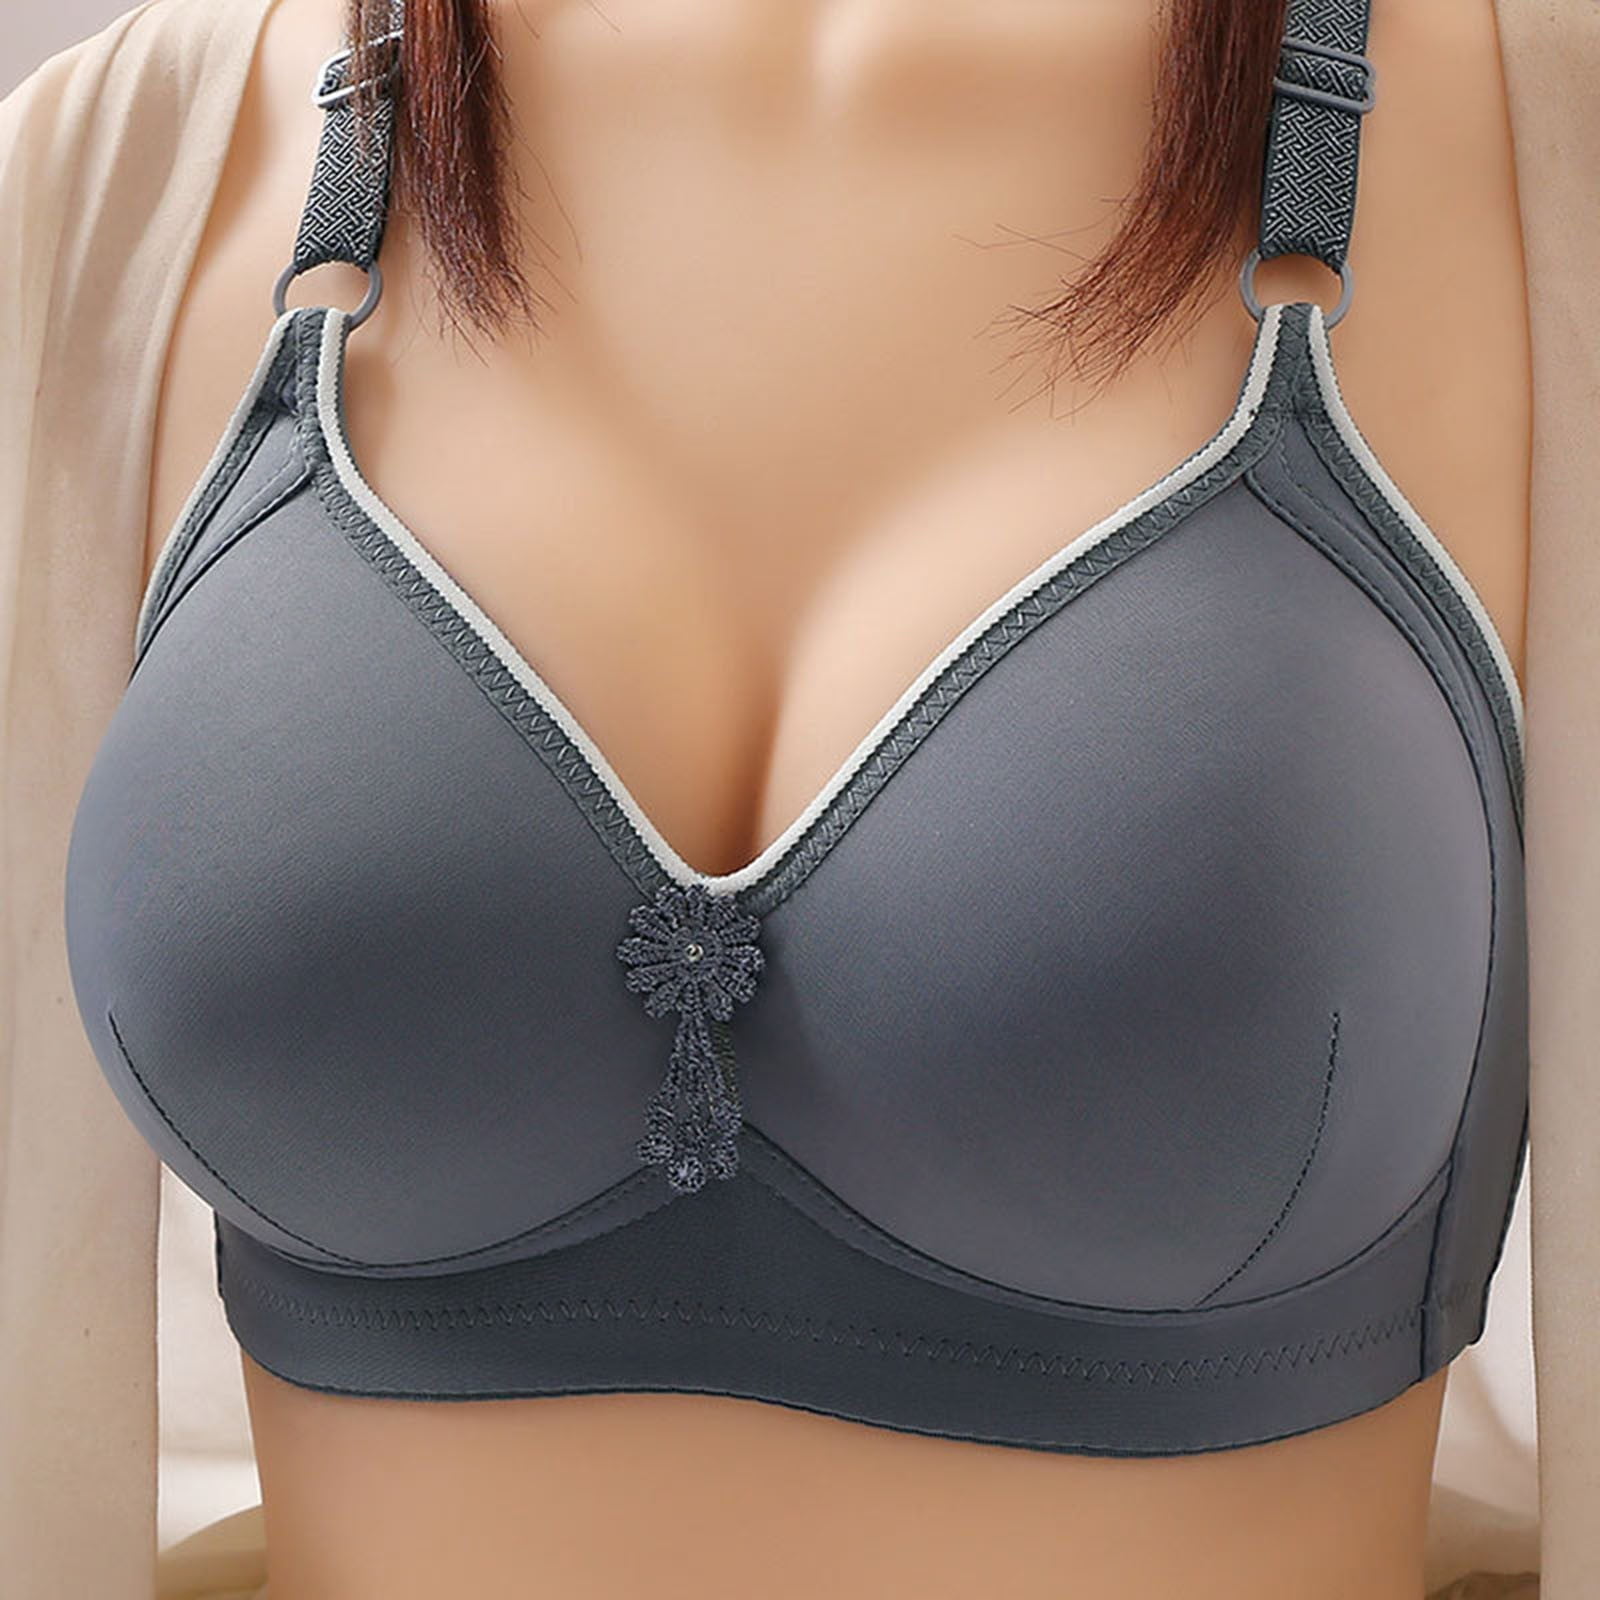 Brnmxoke Women's Bras Clearance No Underwire Full Coverage Comfort